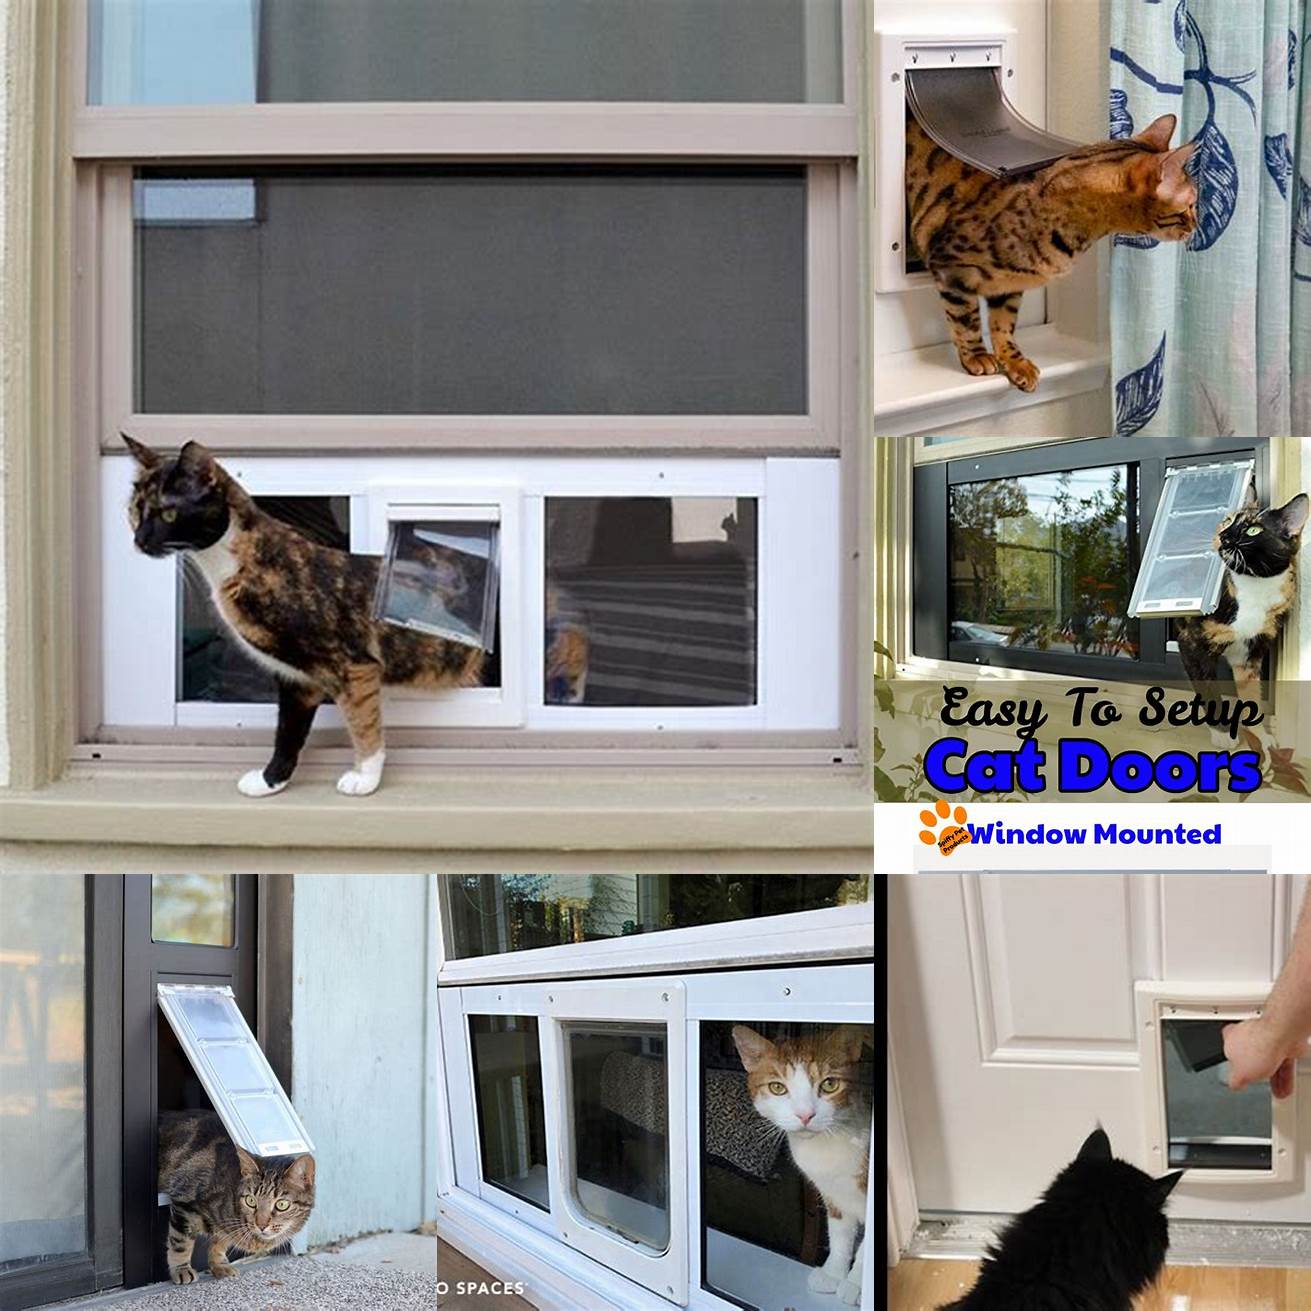 Q Is it safe to install a cat door for sliding window in a rental property